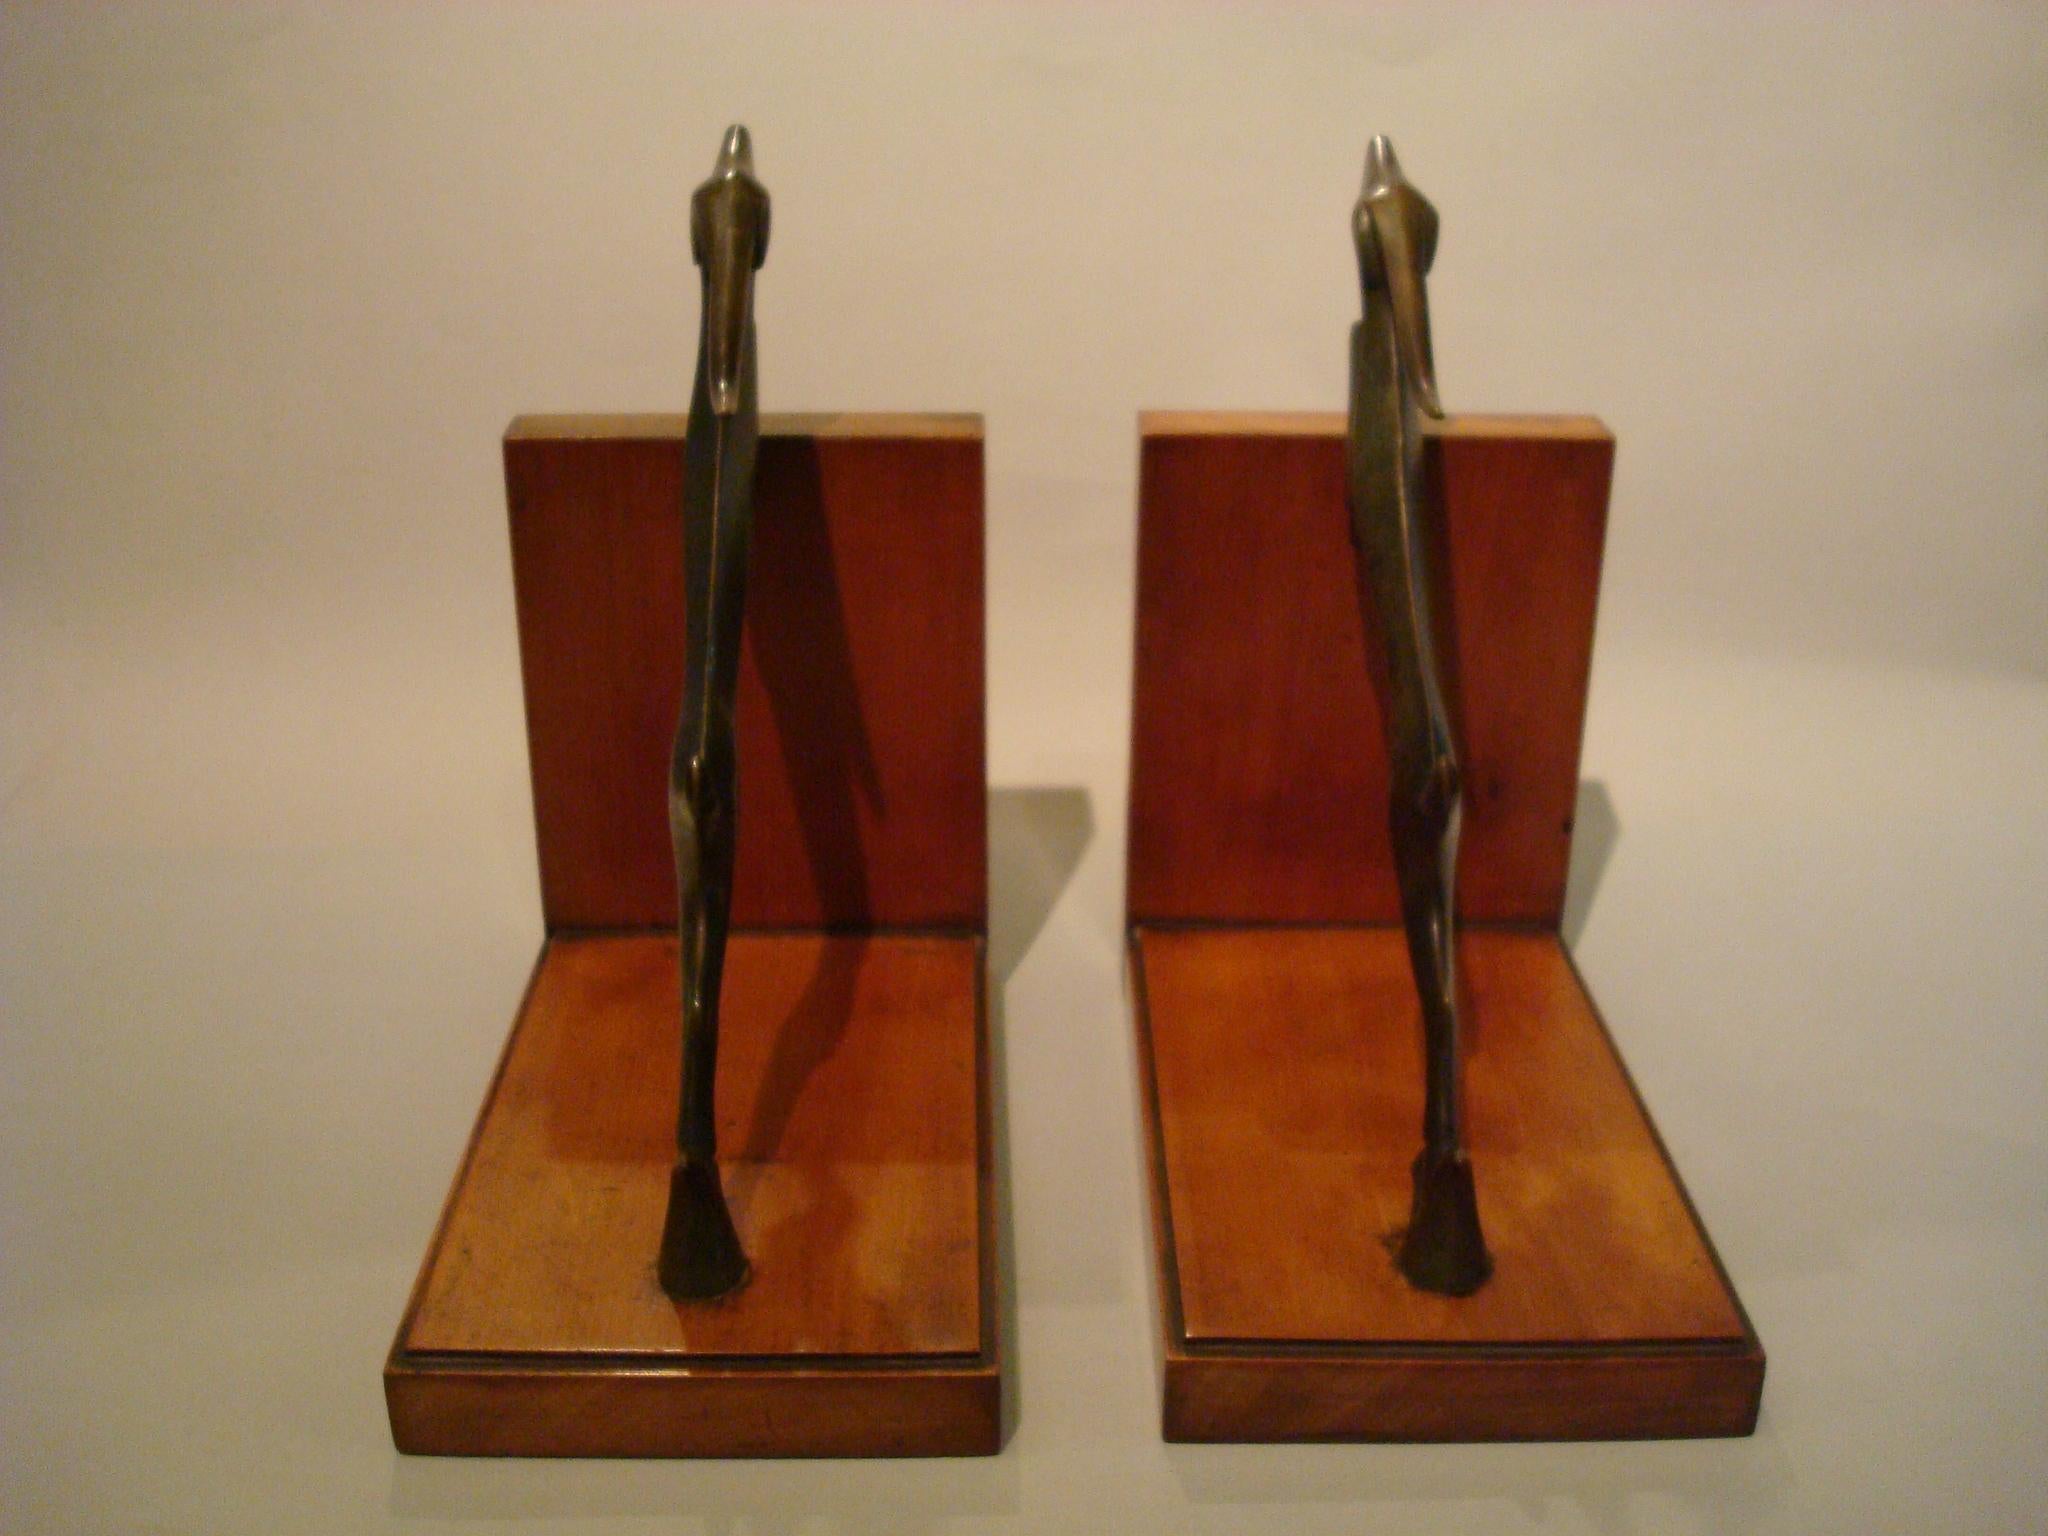 20th Century Art Deco Bronze Bookends Deer Sculpture with Wooden Base, circa 1920s For Sale